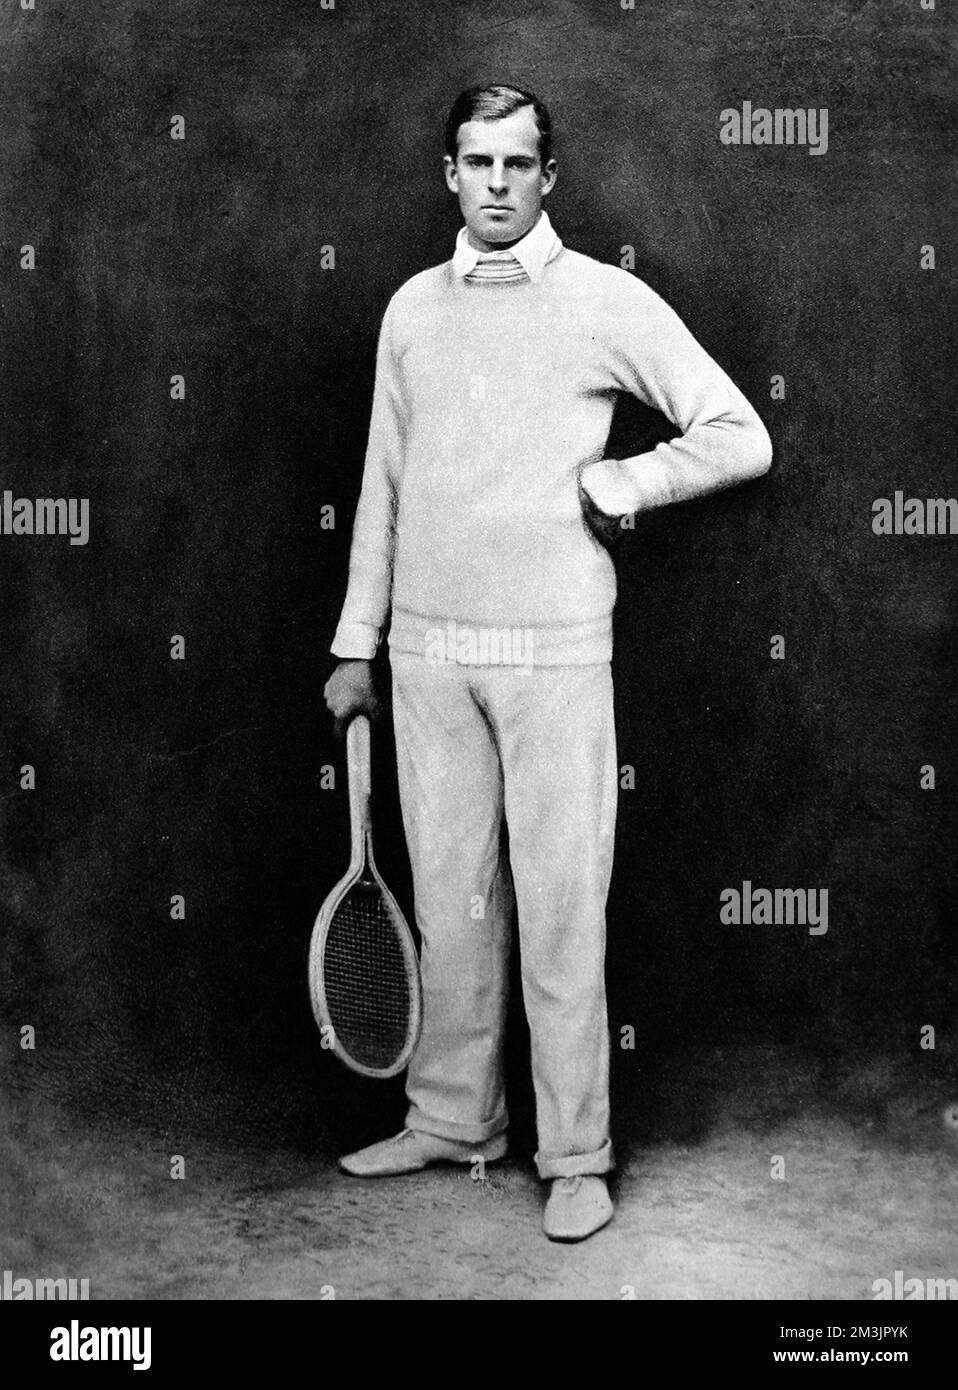 Anthony Frederick Wilding (1883 - 1915), New Zealand tennis player, Wimbledon Mens Champion in 1910, 1911, 1912 and 1913. His championship run came to an end in 1914 when he was beaten by Australian, N. E. Brookes in three straight sets.     Date: 1914 Stock Photo